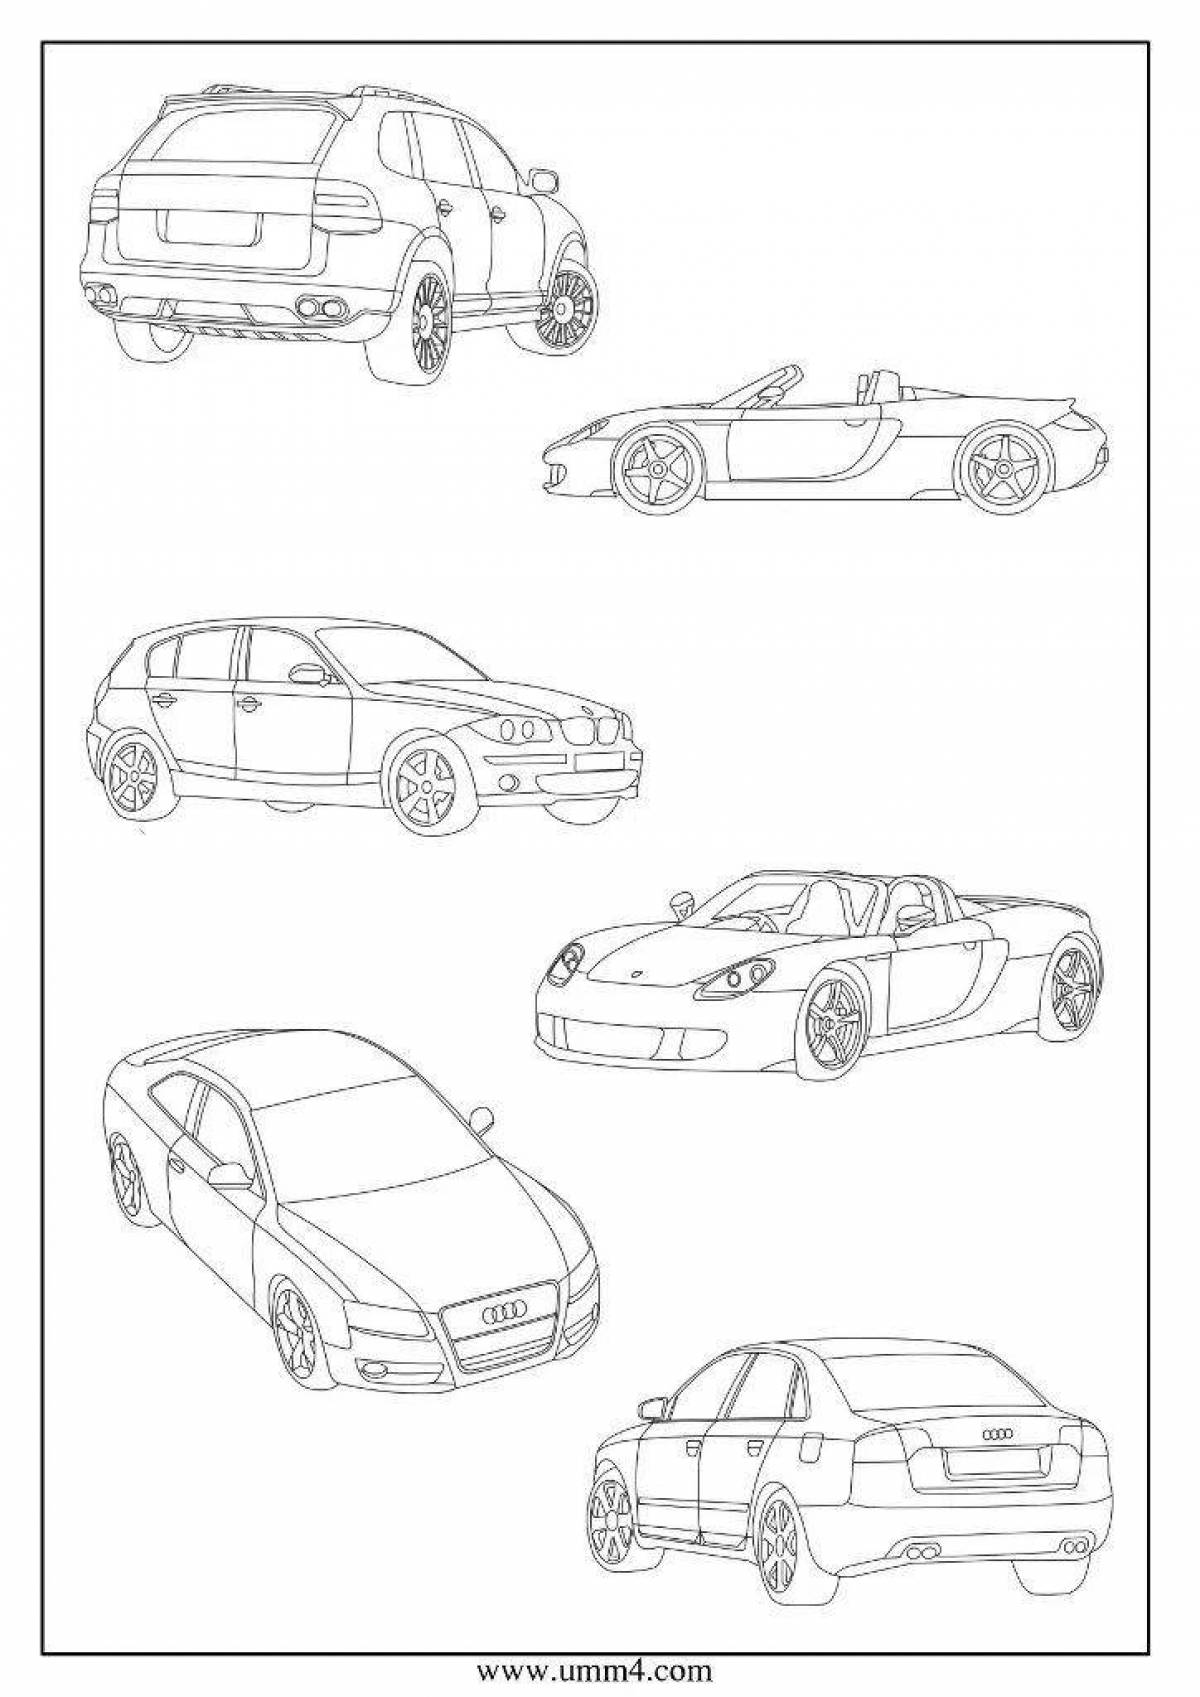 Fun cars coloring page